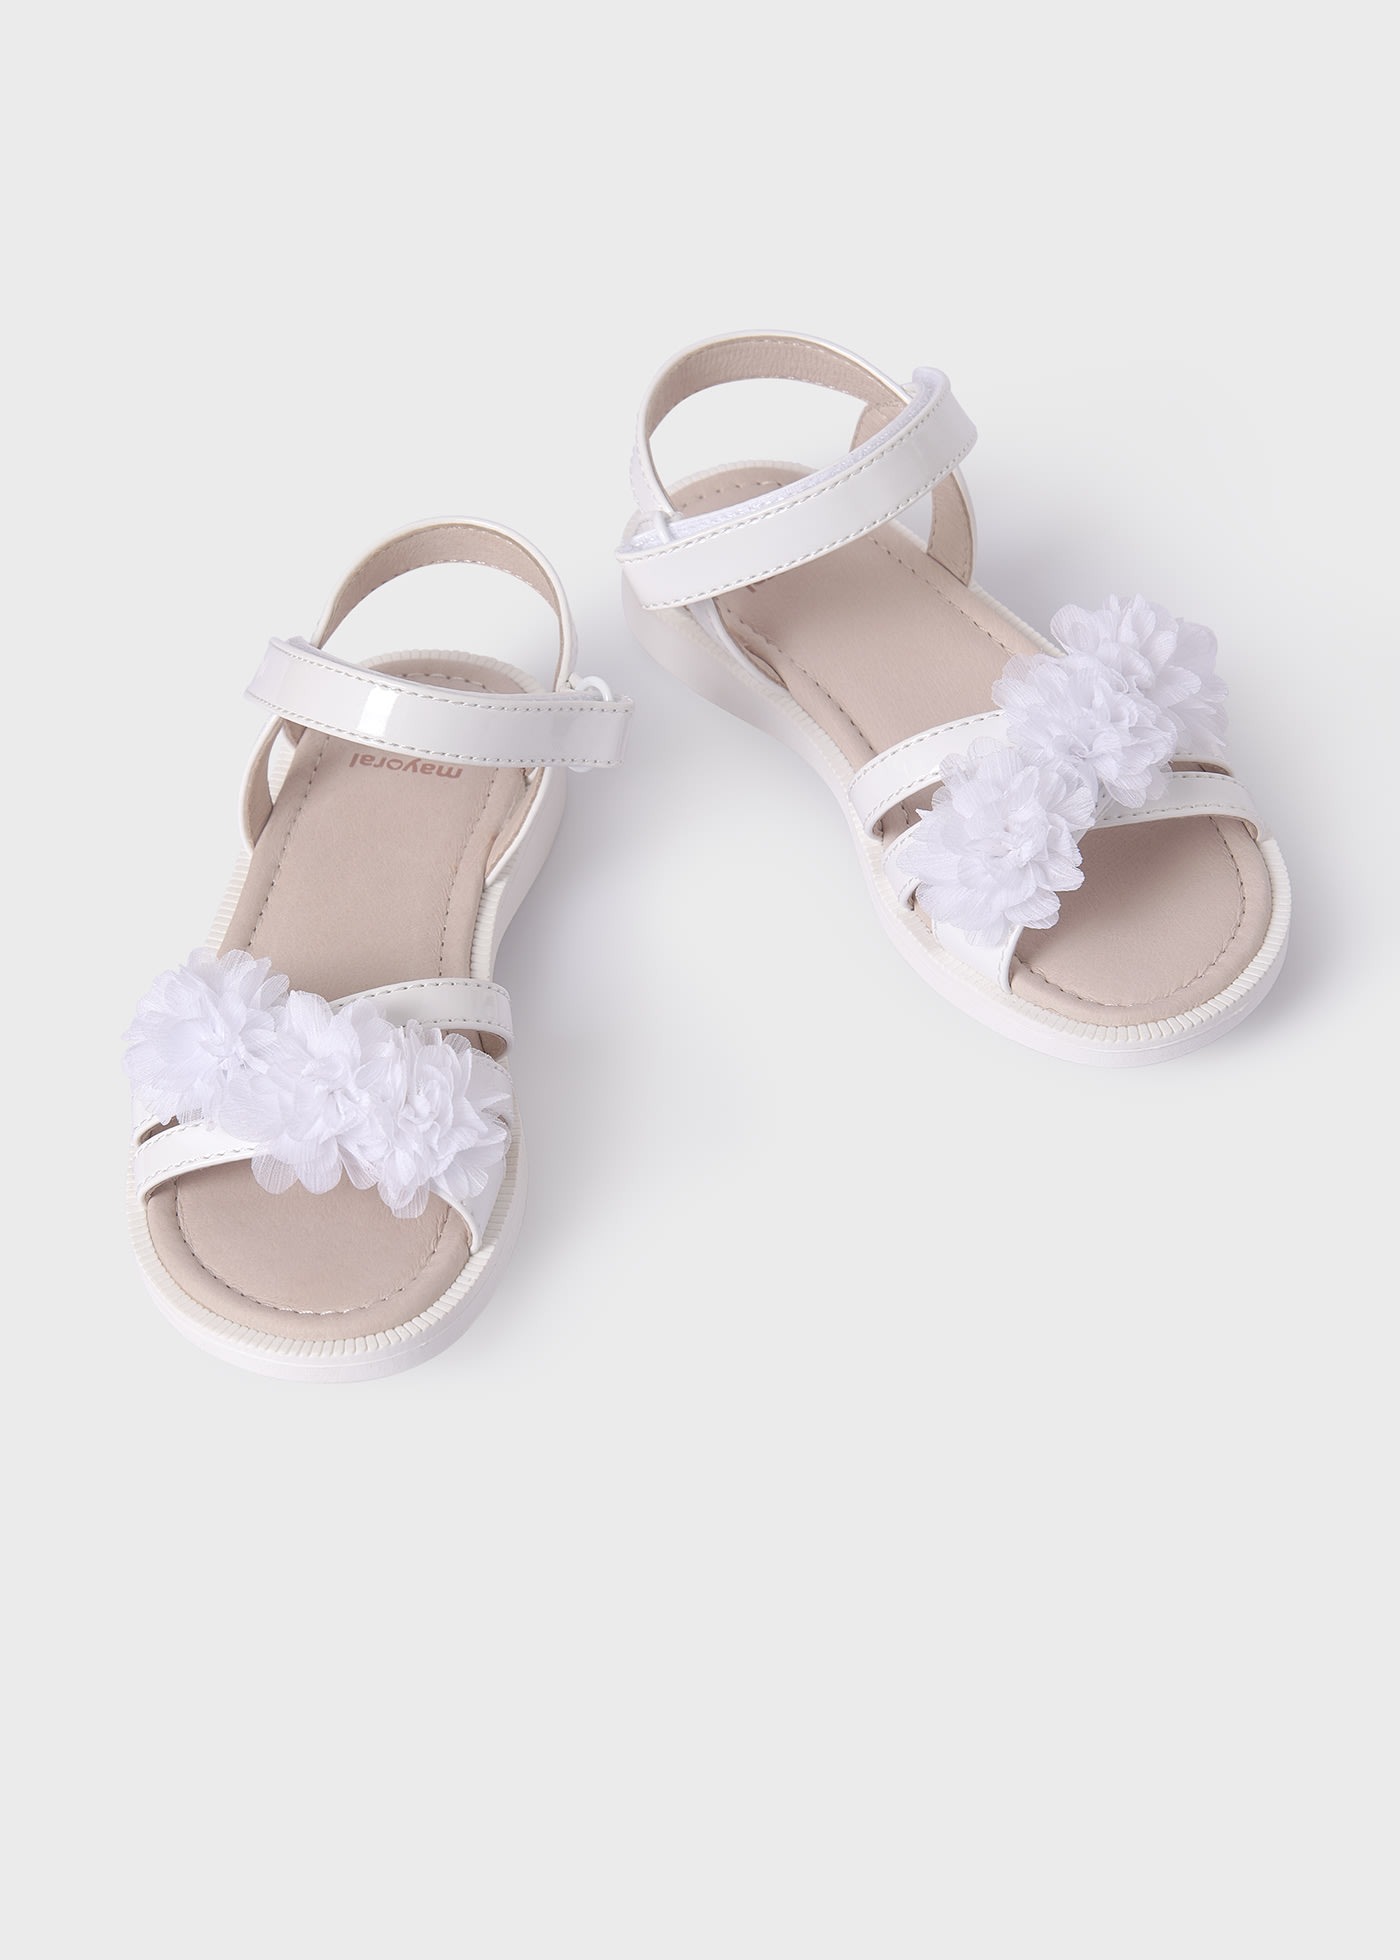 Girls sandals sustainable patent leather